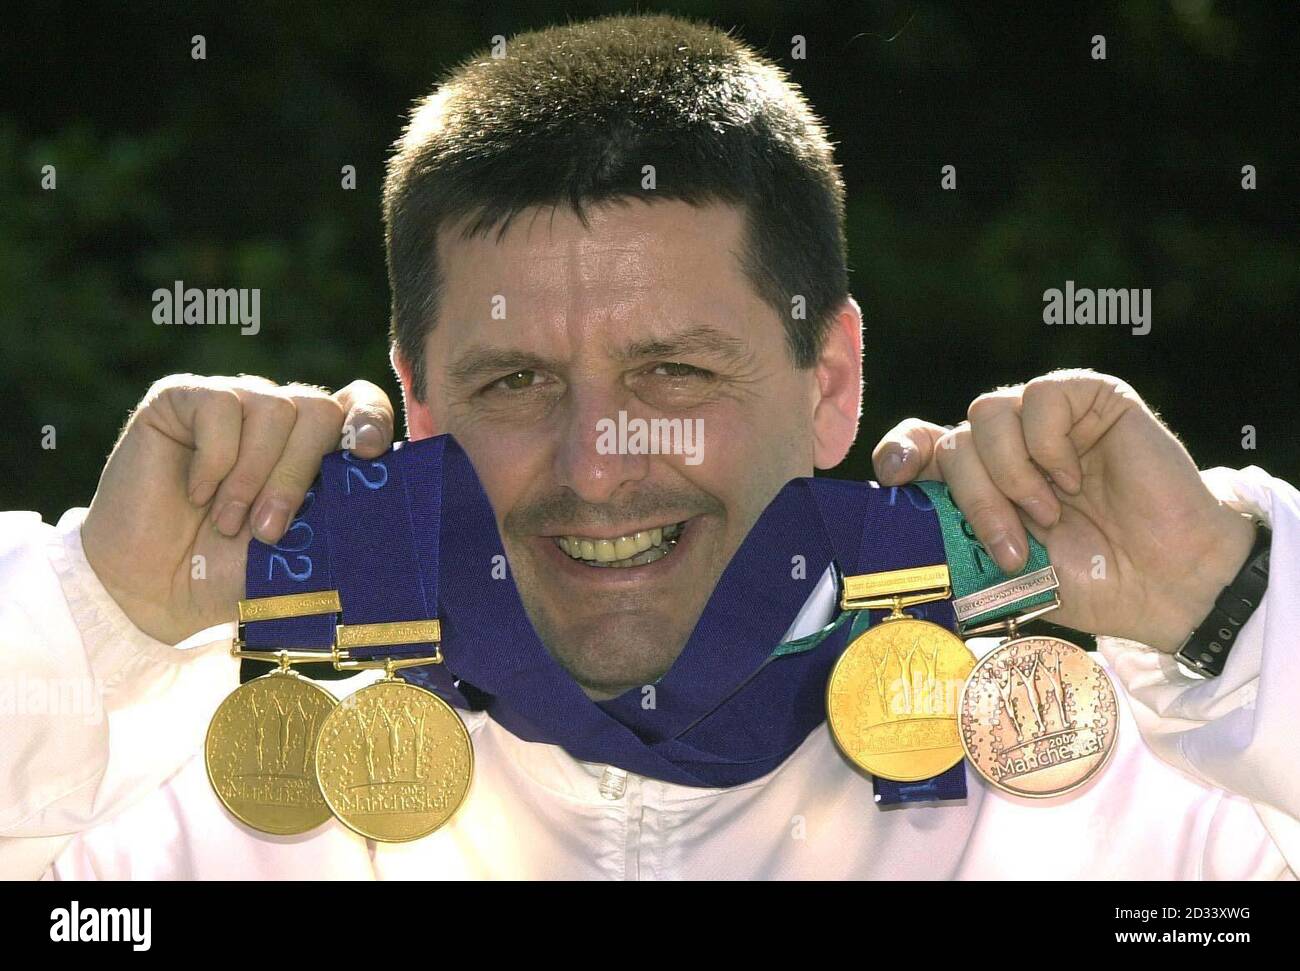 3 Gold's and a Bronze for Pistol shooter Michael Gault at the 2002 Commonwealth Games shooting competitions at the National Shooting Centre Bisley. Stock Photo